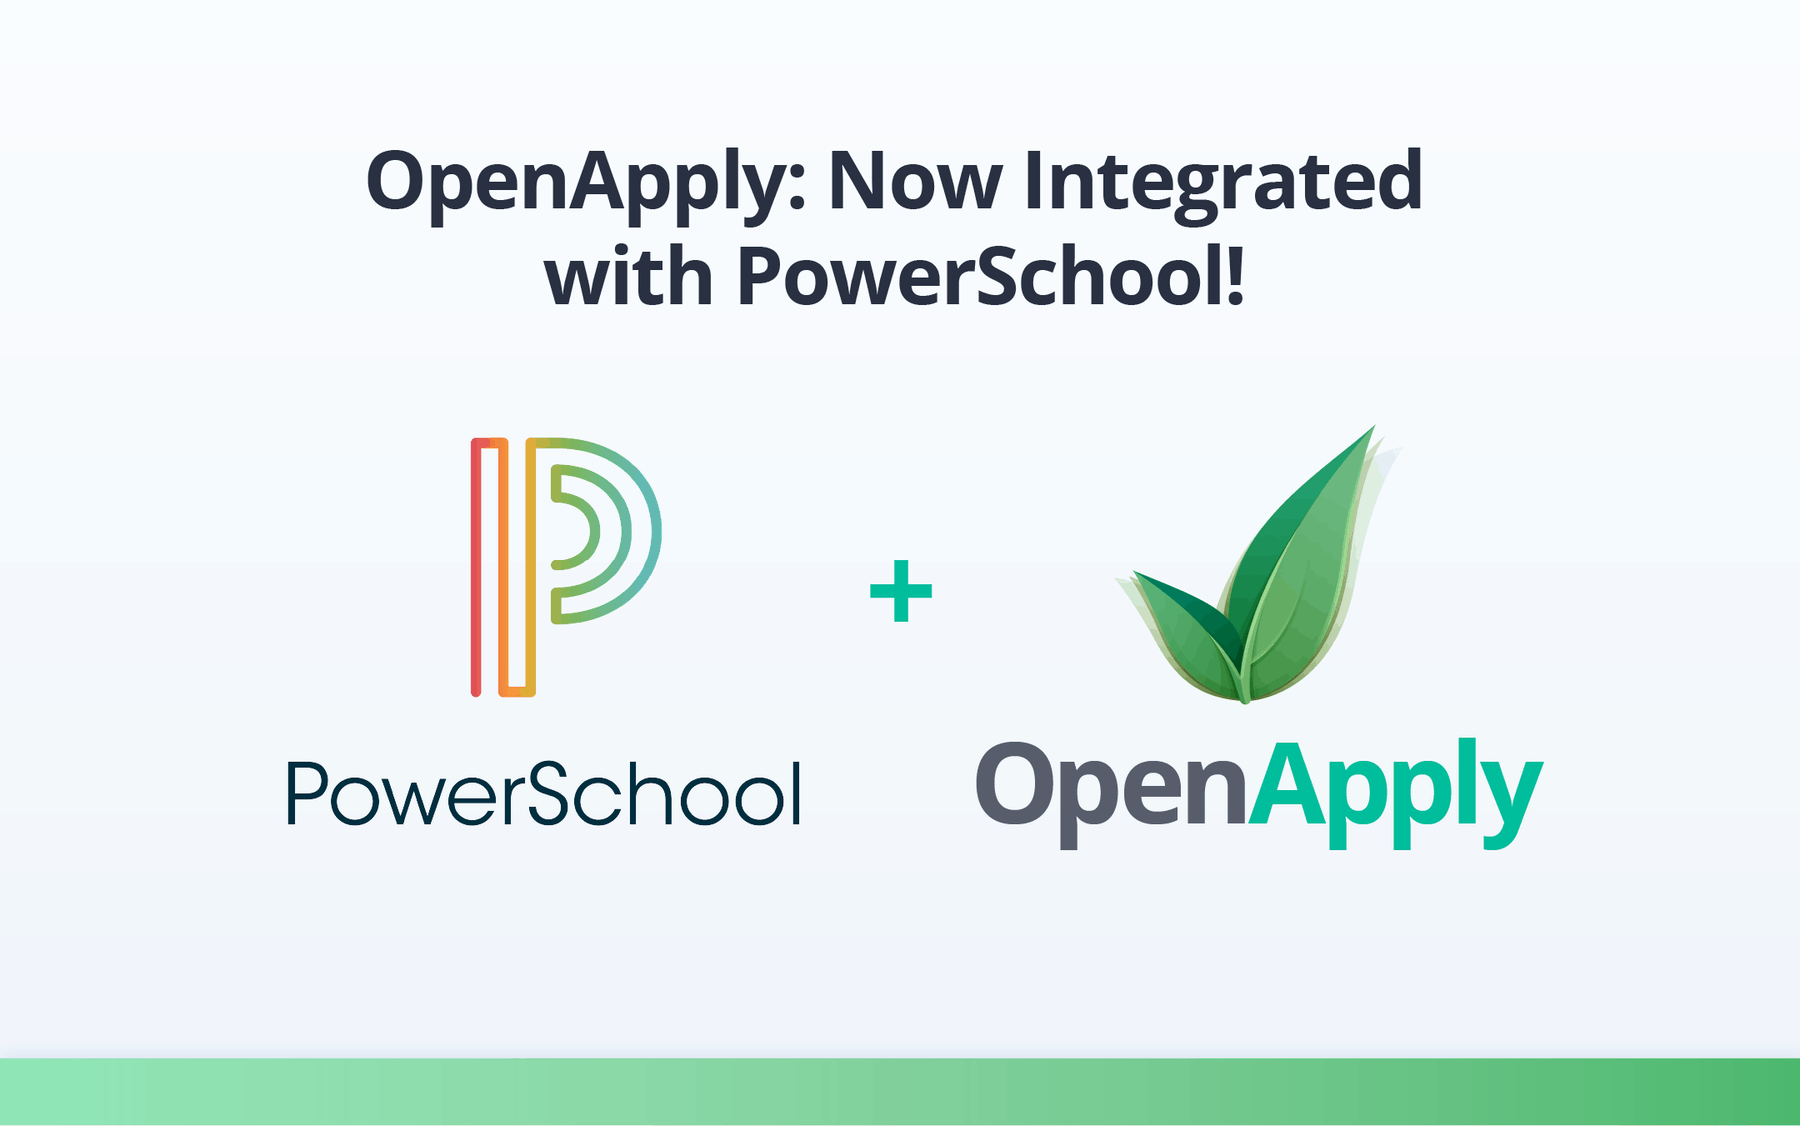 OpenApply: Now Integrated with PowerSchool!